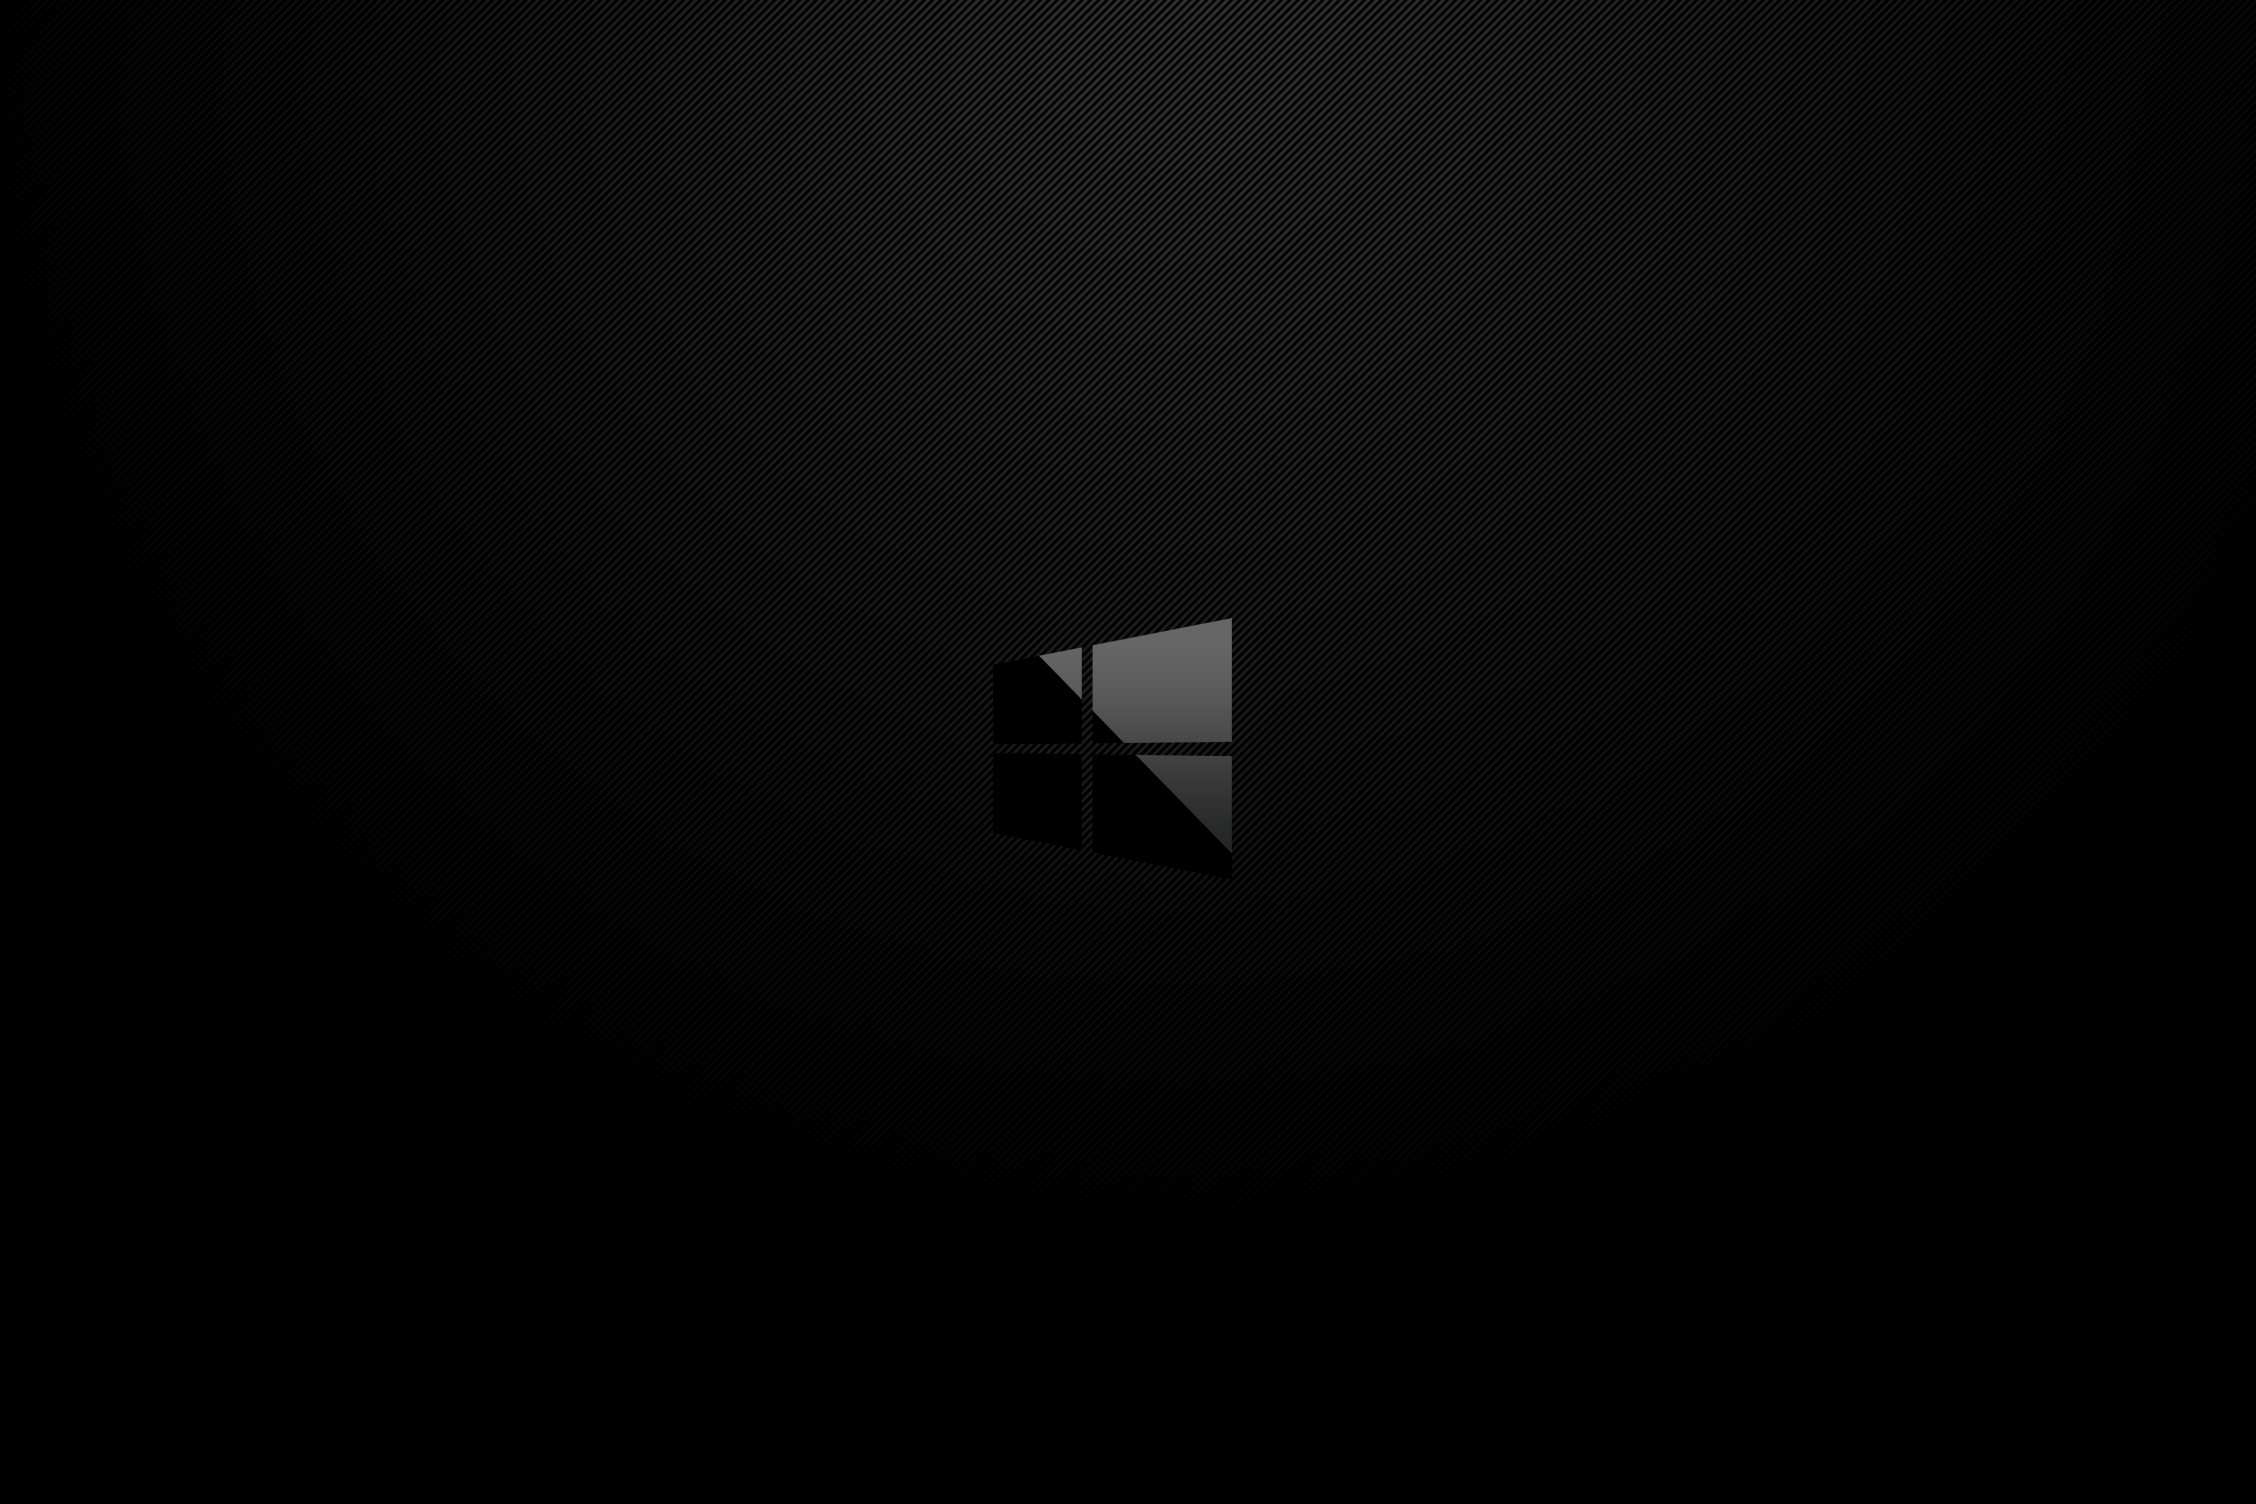 Made A Dark Minimalist Wallpaper For My Surface Laptop Feel